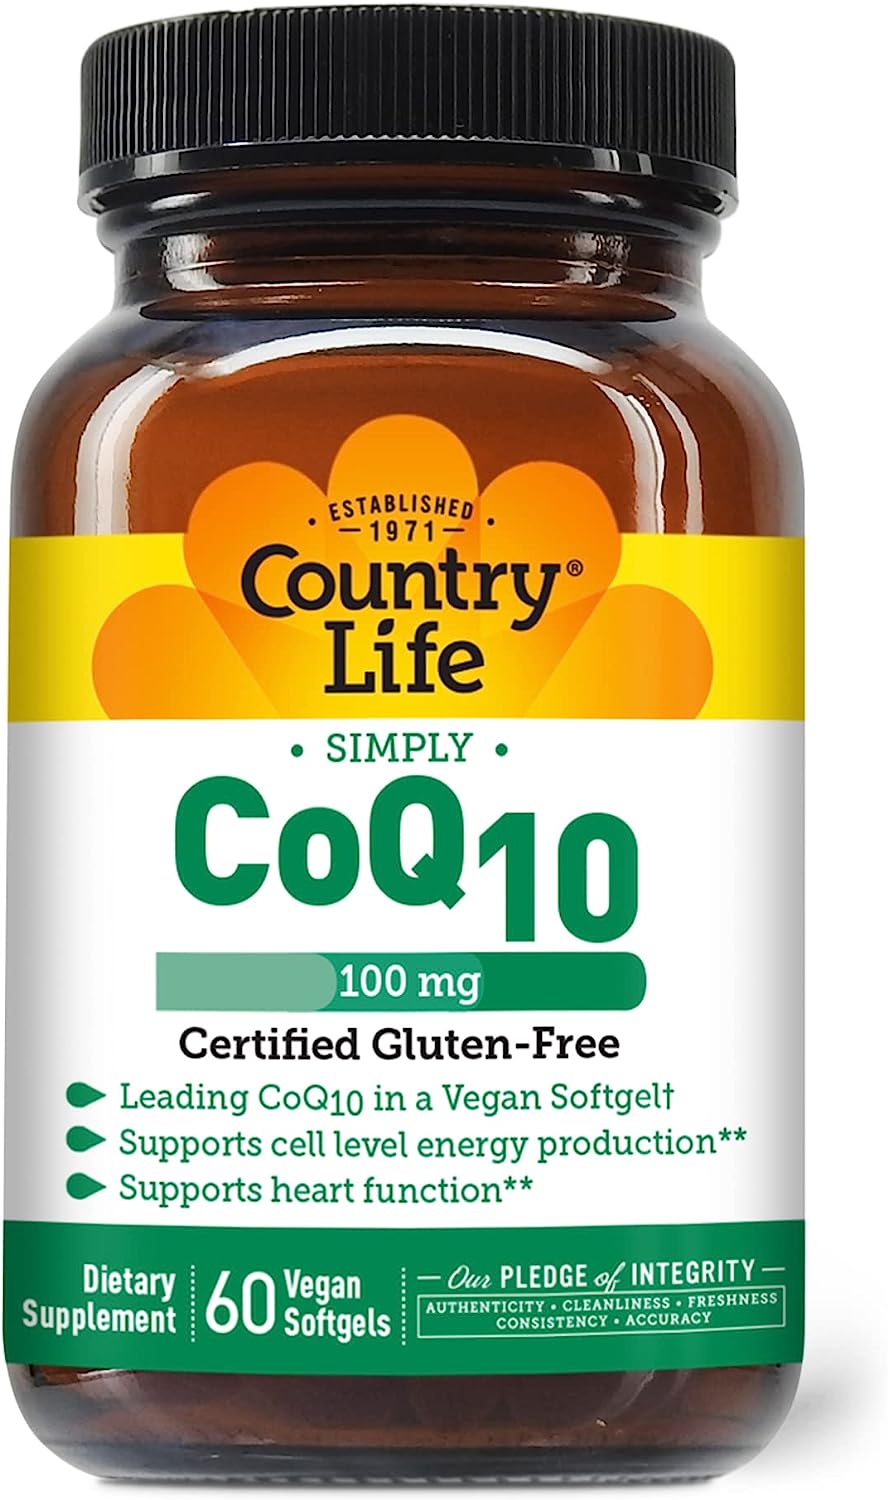 Country Life Simply CoQ10, Supports Heart Function, 100mg, 60 Softgels, Certified Gluten Free, Certified Vegan